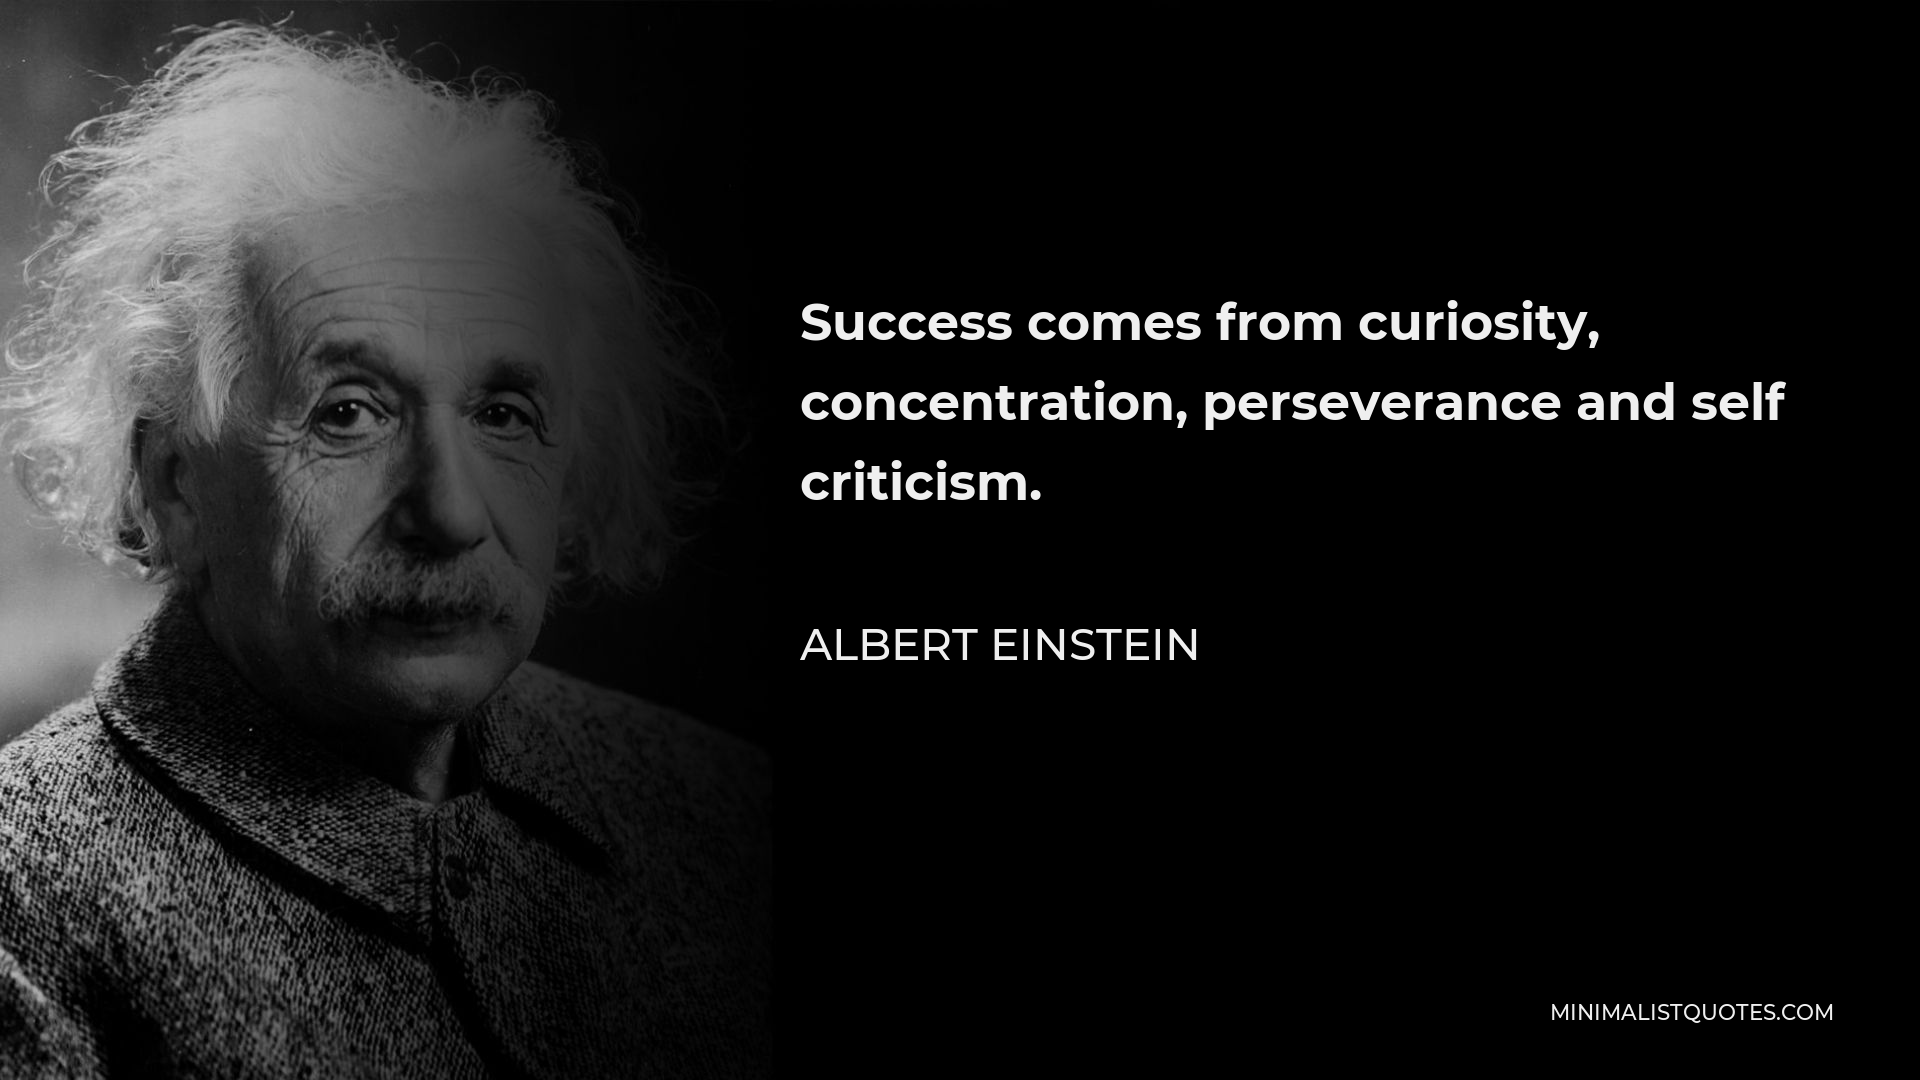 Albert Einstein Quote - Success comes from curiosity, concentration, perseverance and self criticism.